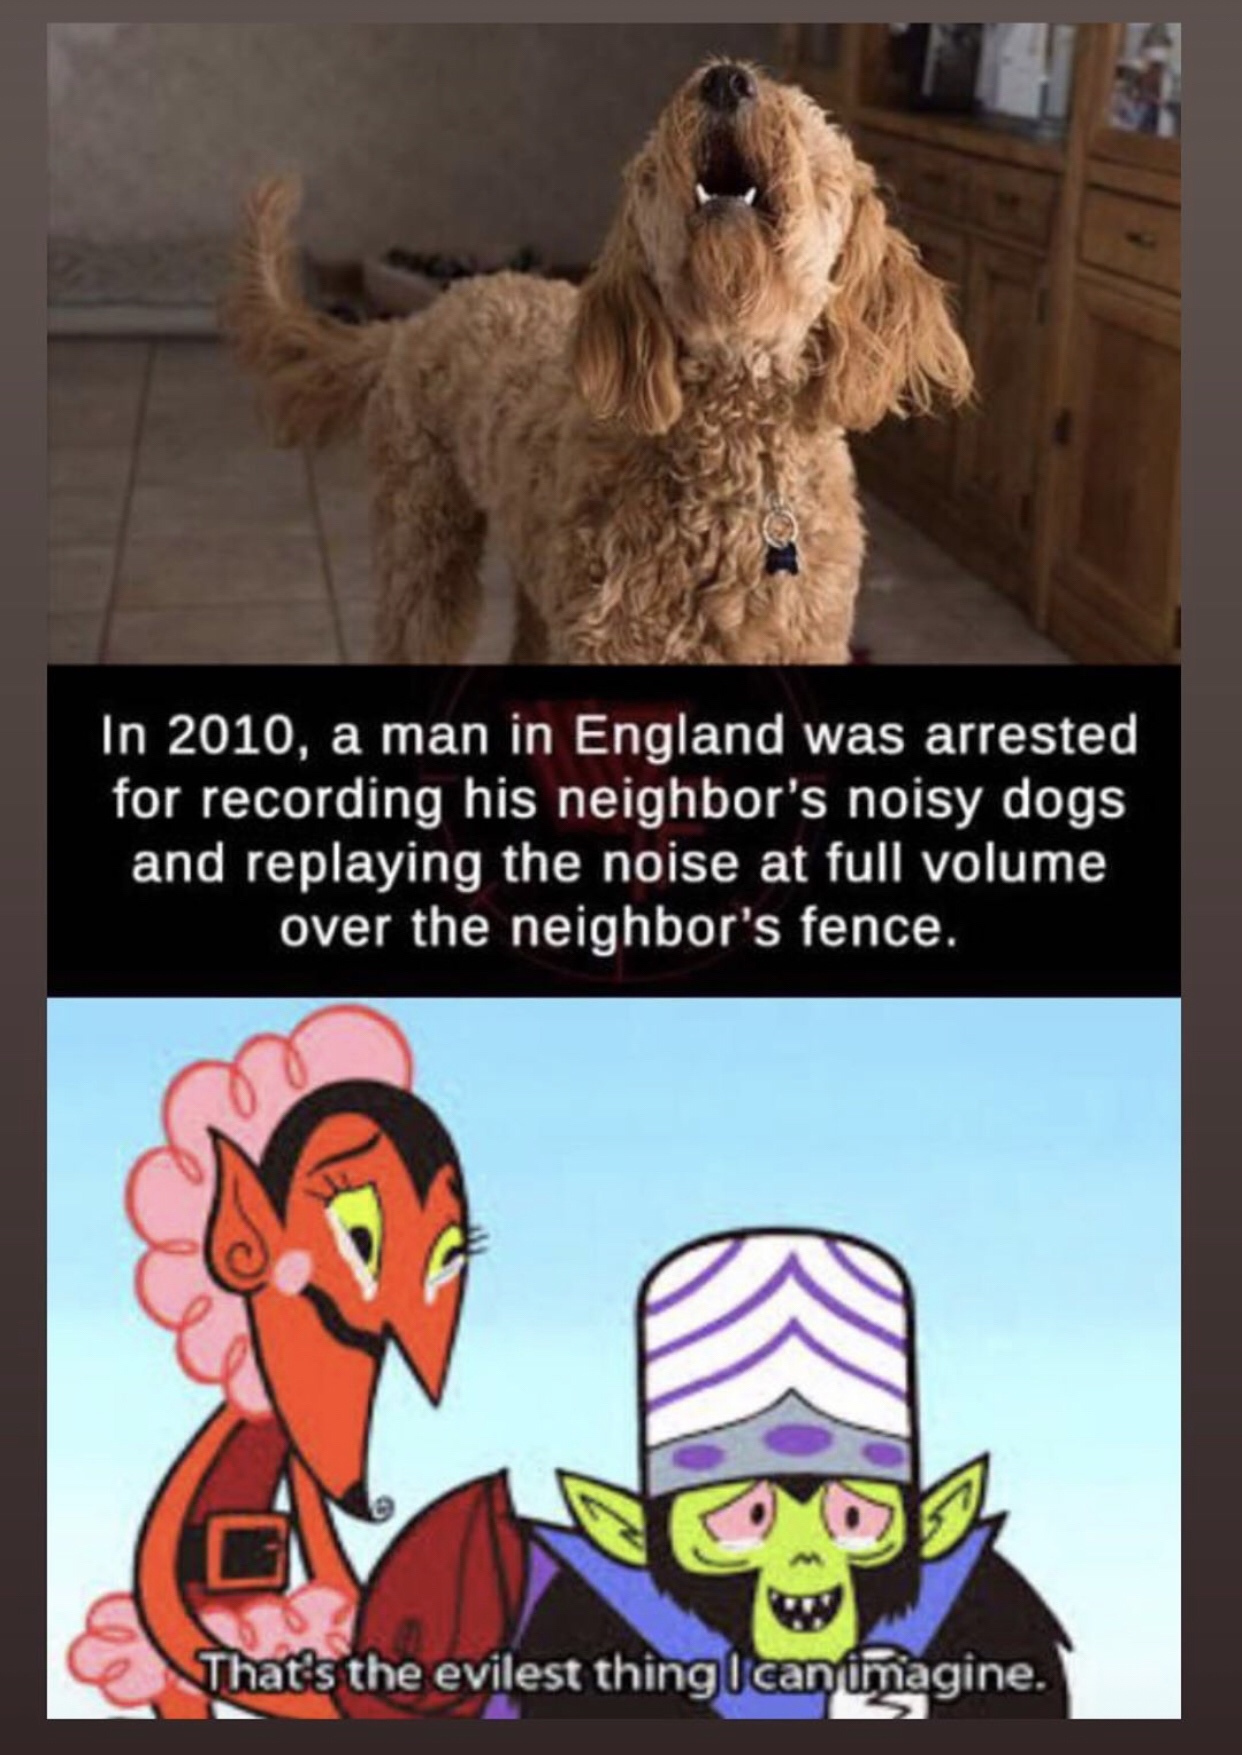 that's the evilest thing i can imagine meme - In 2010, a man in England was arrested for recording his neighbor's noisy dogs and replaying the noise at full volume over the neighbor's fence. That's the evilest thing I can imagine.